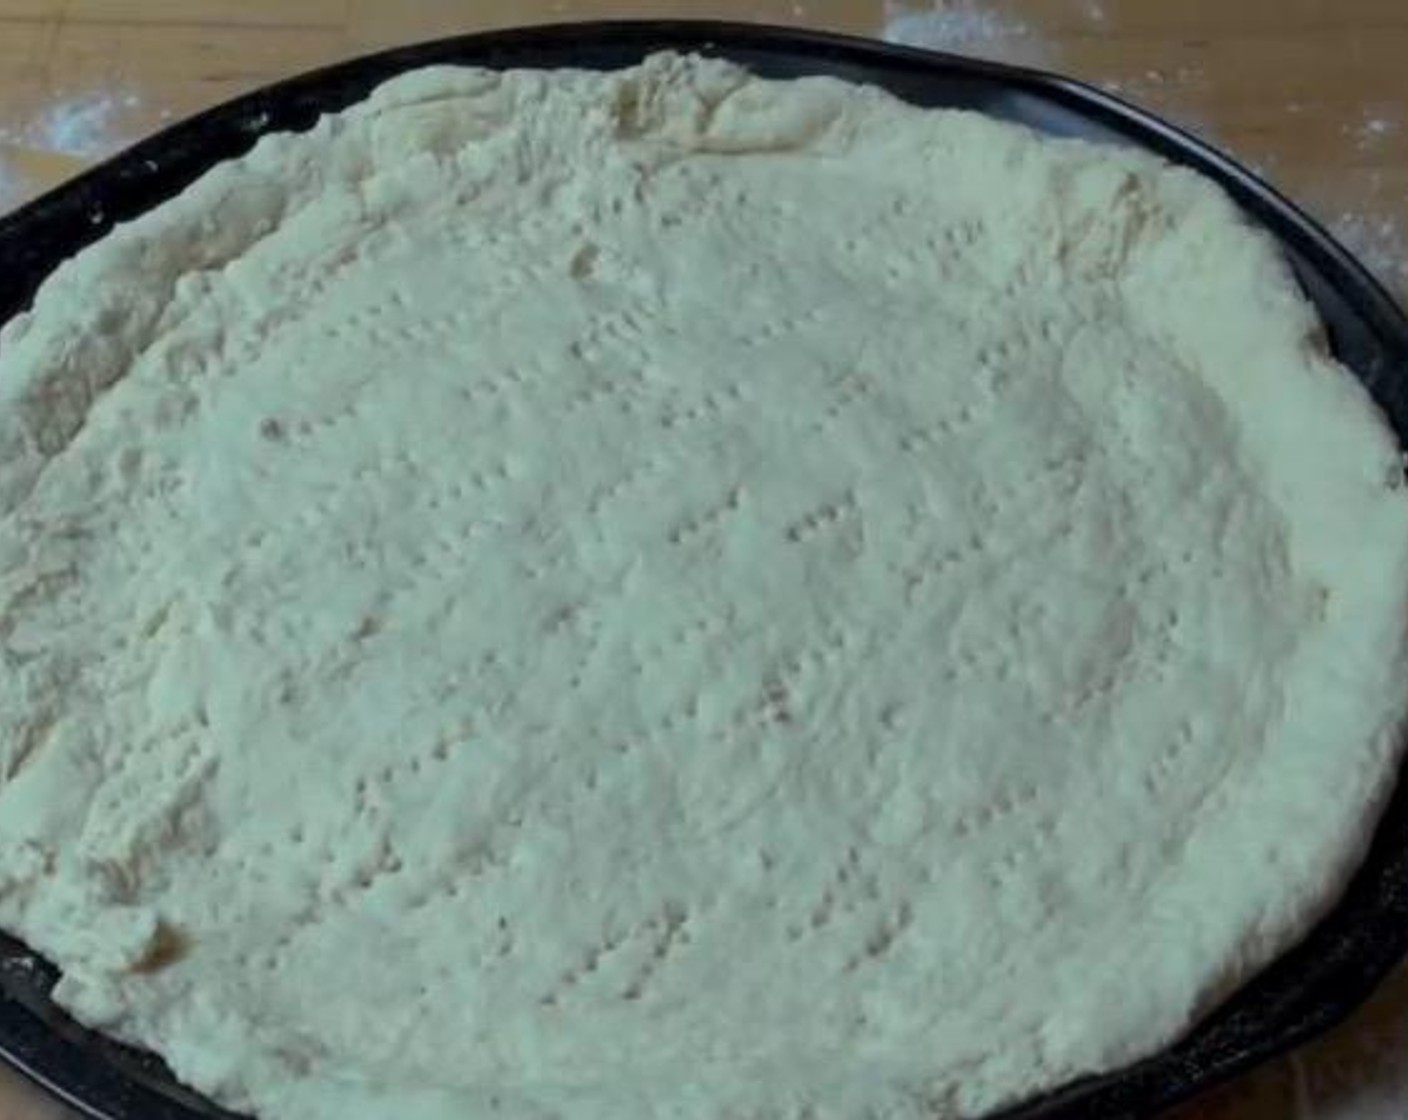 step 2 On a floured surface, gently knead the dough until it is smooth. Roll it out into a pizza shape and transfer onto a large oven tray. Prick with a fork across the surface to prevent rising.